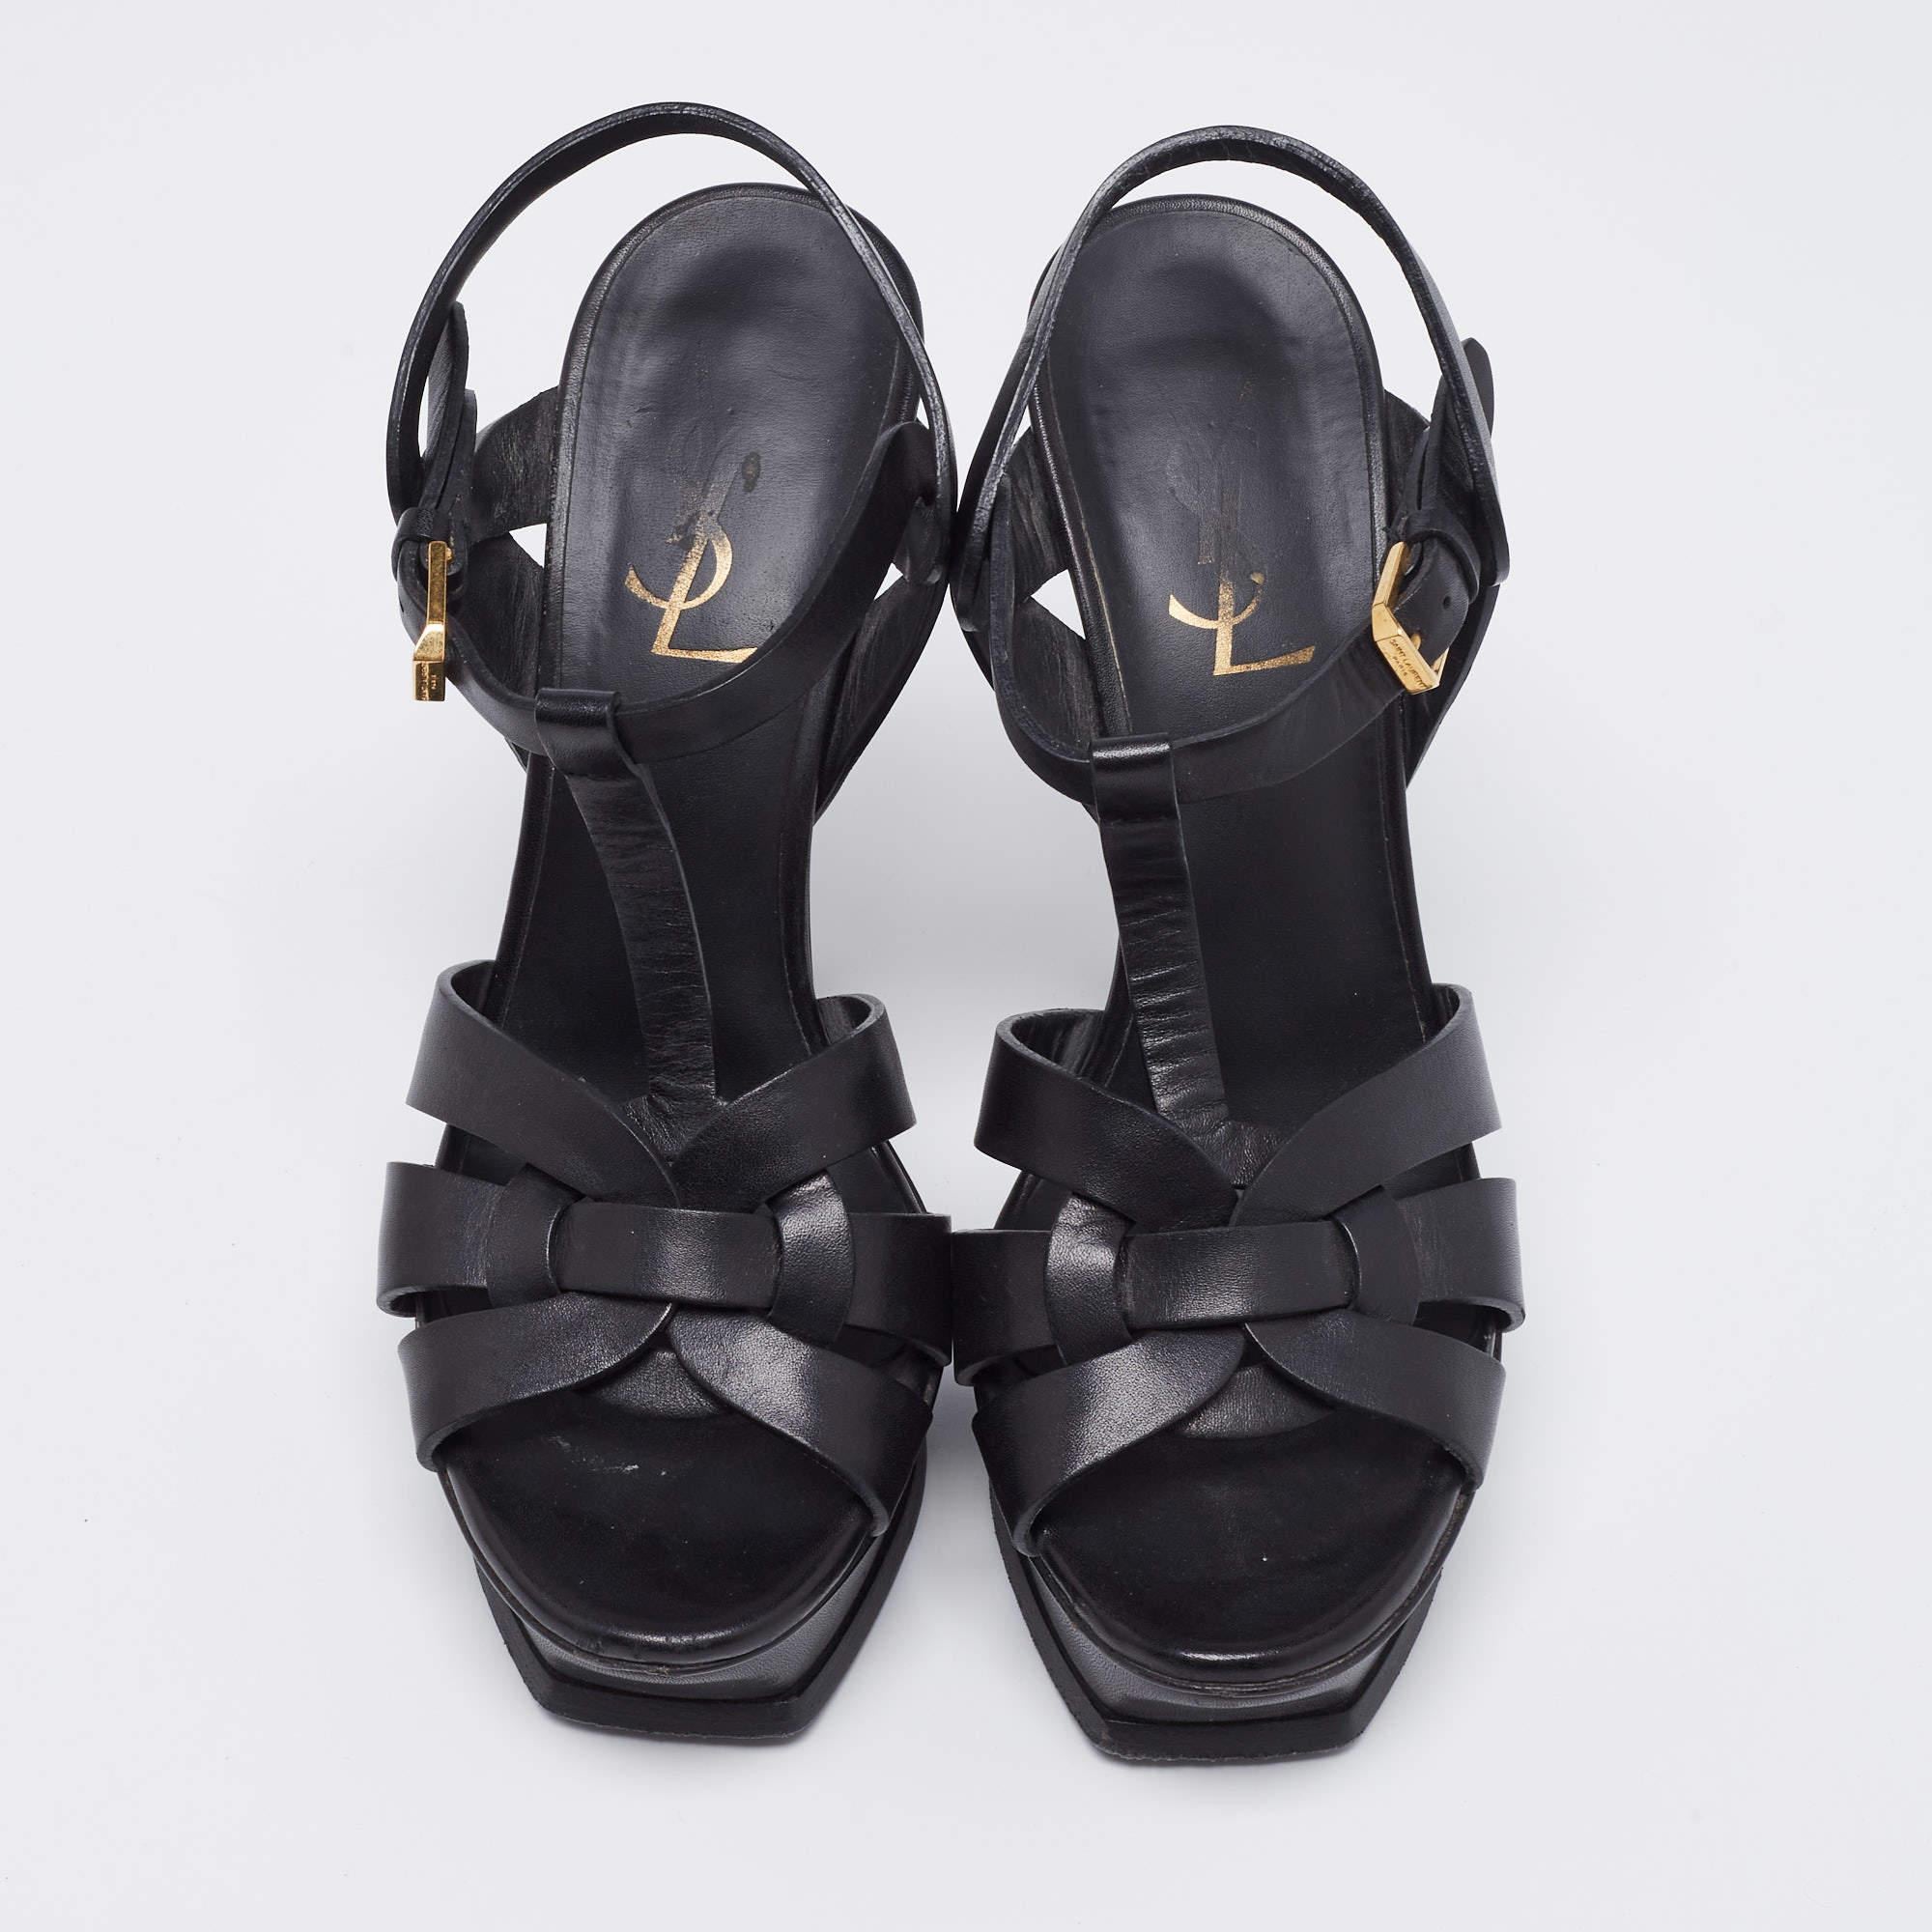 A timeless aesthetic and stellar craftsmanship in shoemaking are evident in these Yves Saint Laurent Tribute sandals. From their interwoven construction to the sturdy heels supported by platforms, these sandals can be styled with numerous outfits.

